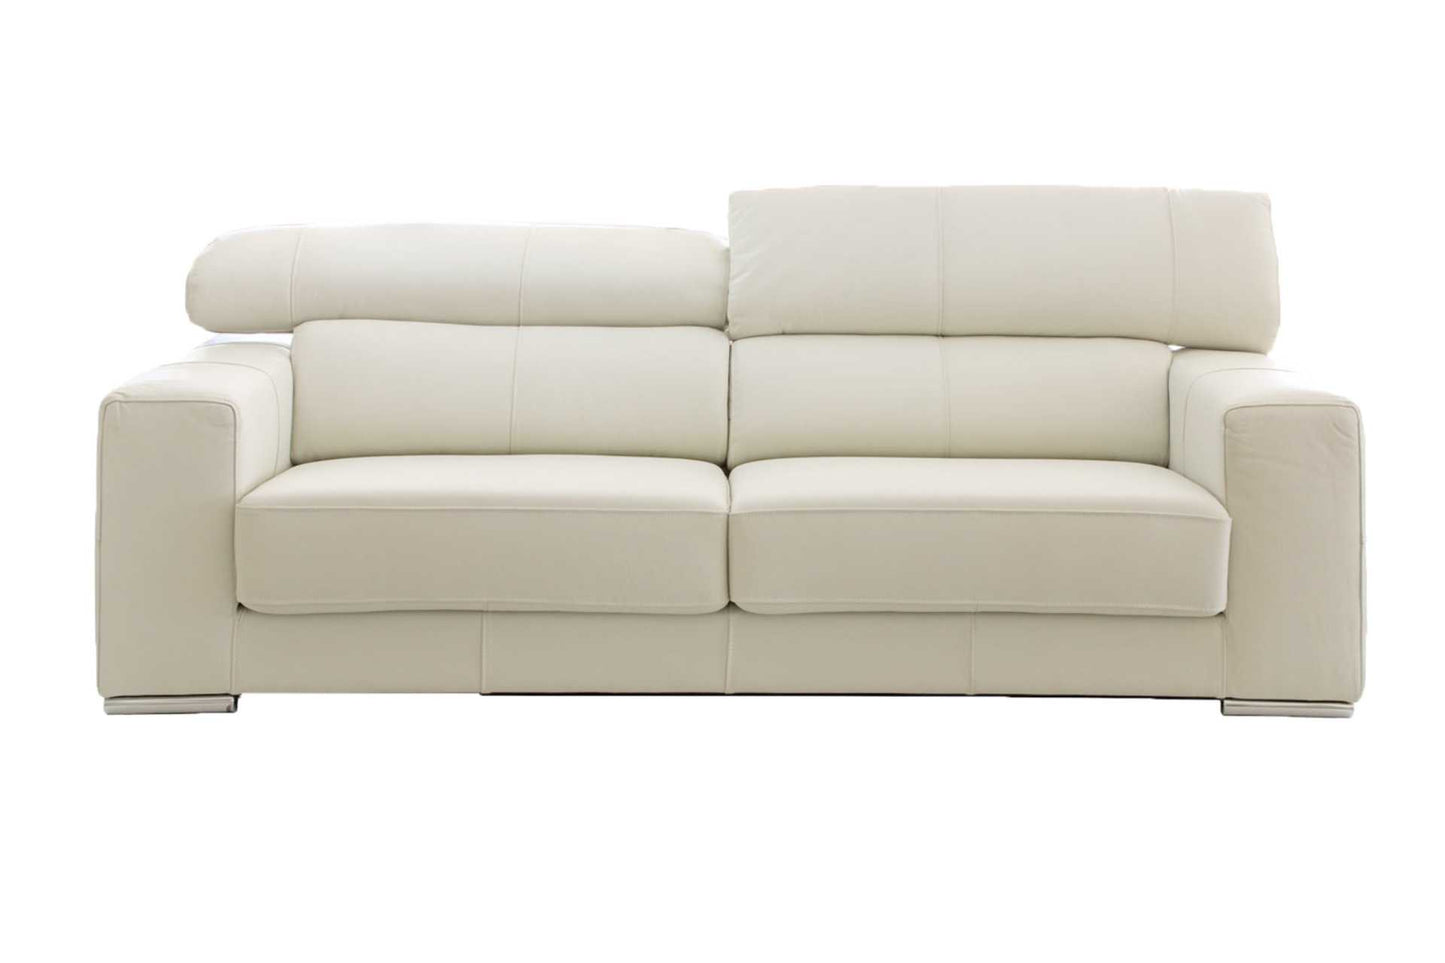 Light grey 2 seater sofa with adjustable  headrests.